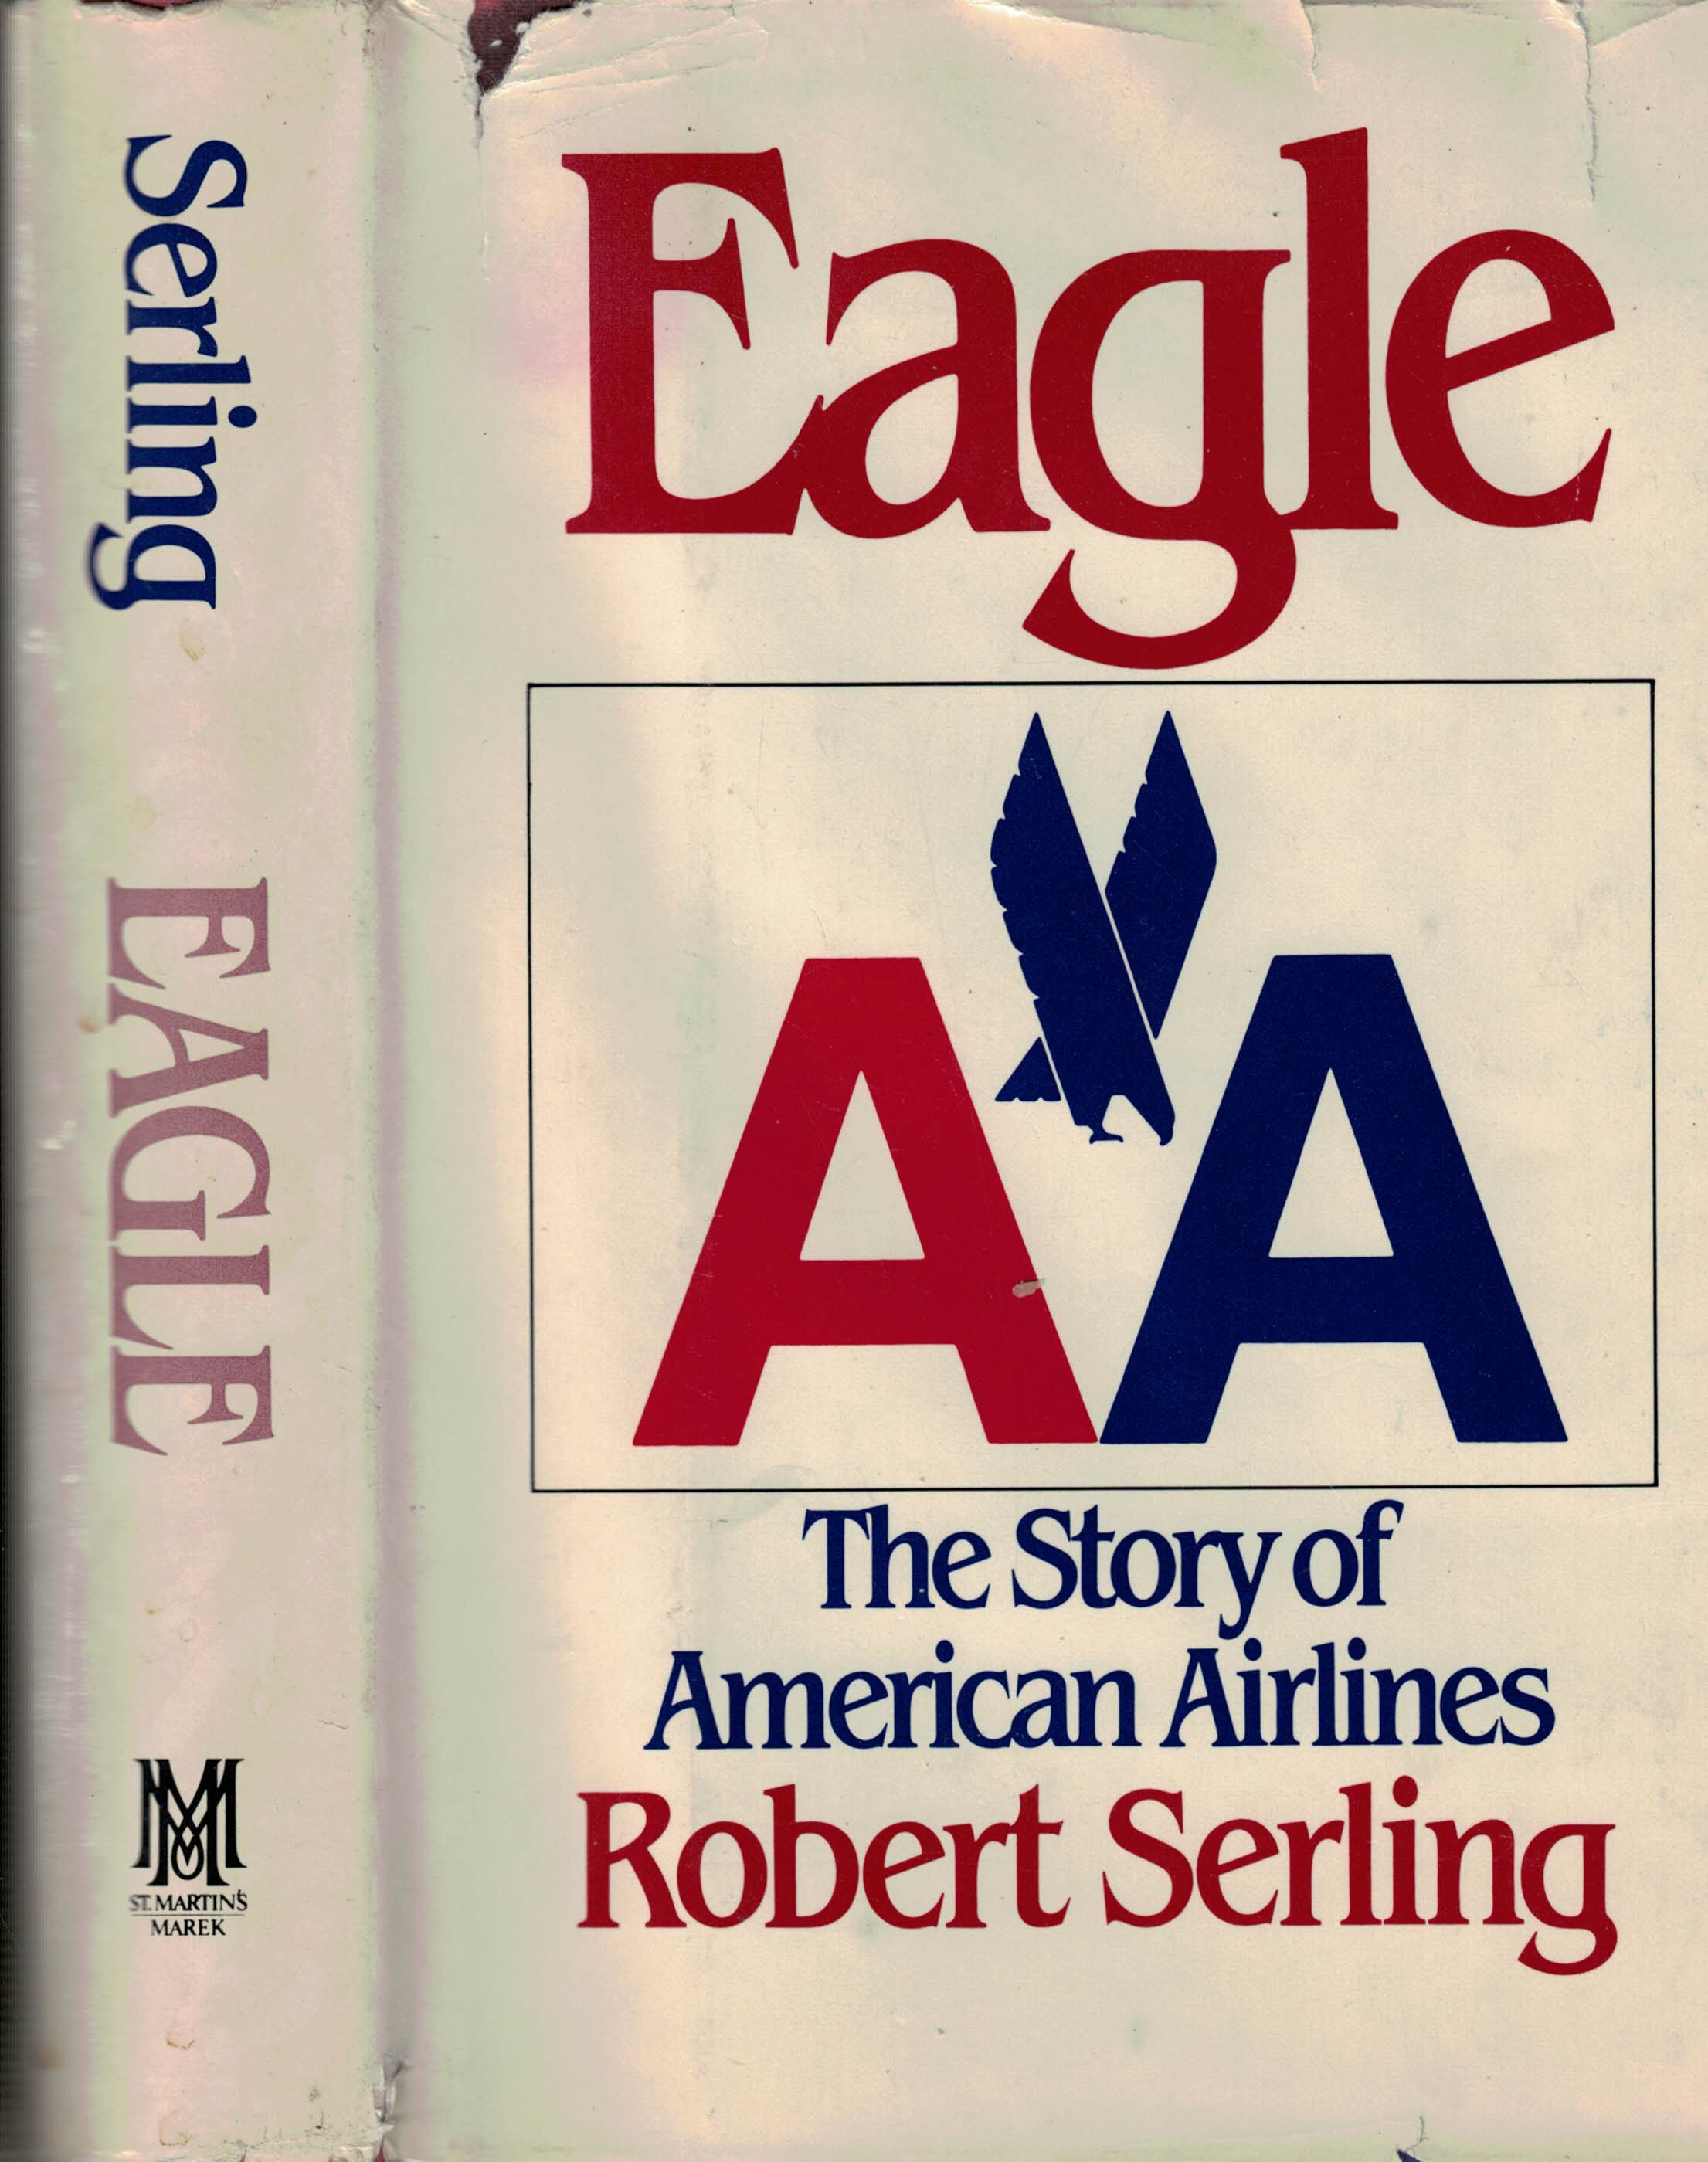 Eagle. The Story of American Airlines.